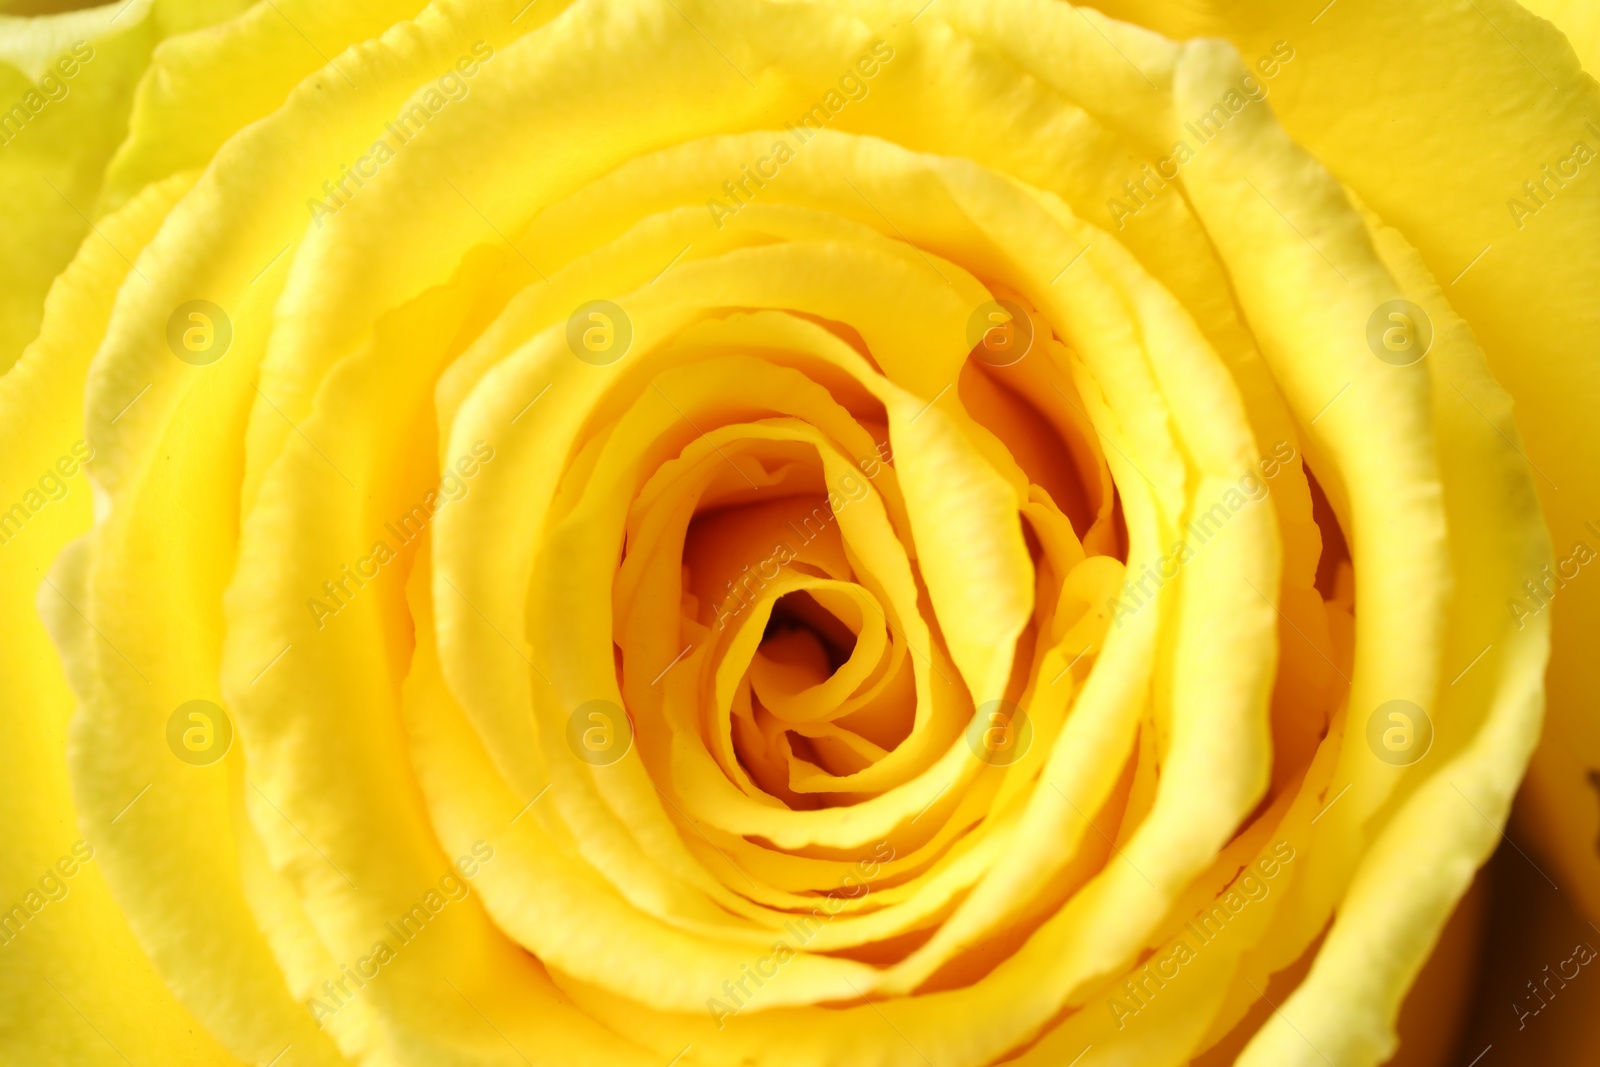 Photo of Beautiful rose with yellow petals as background, macro view